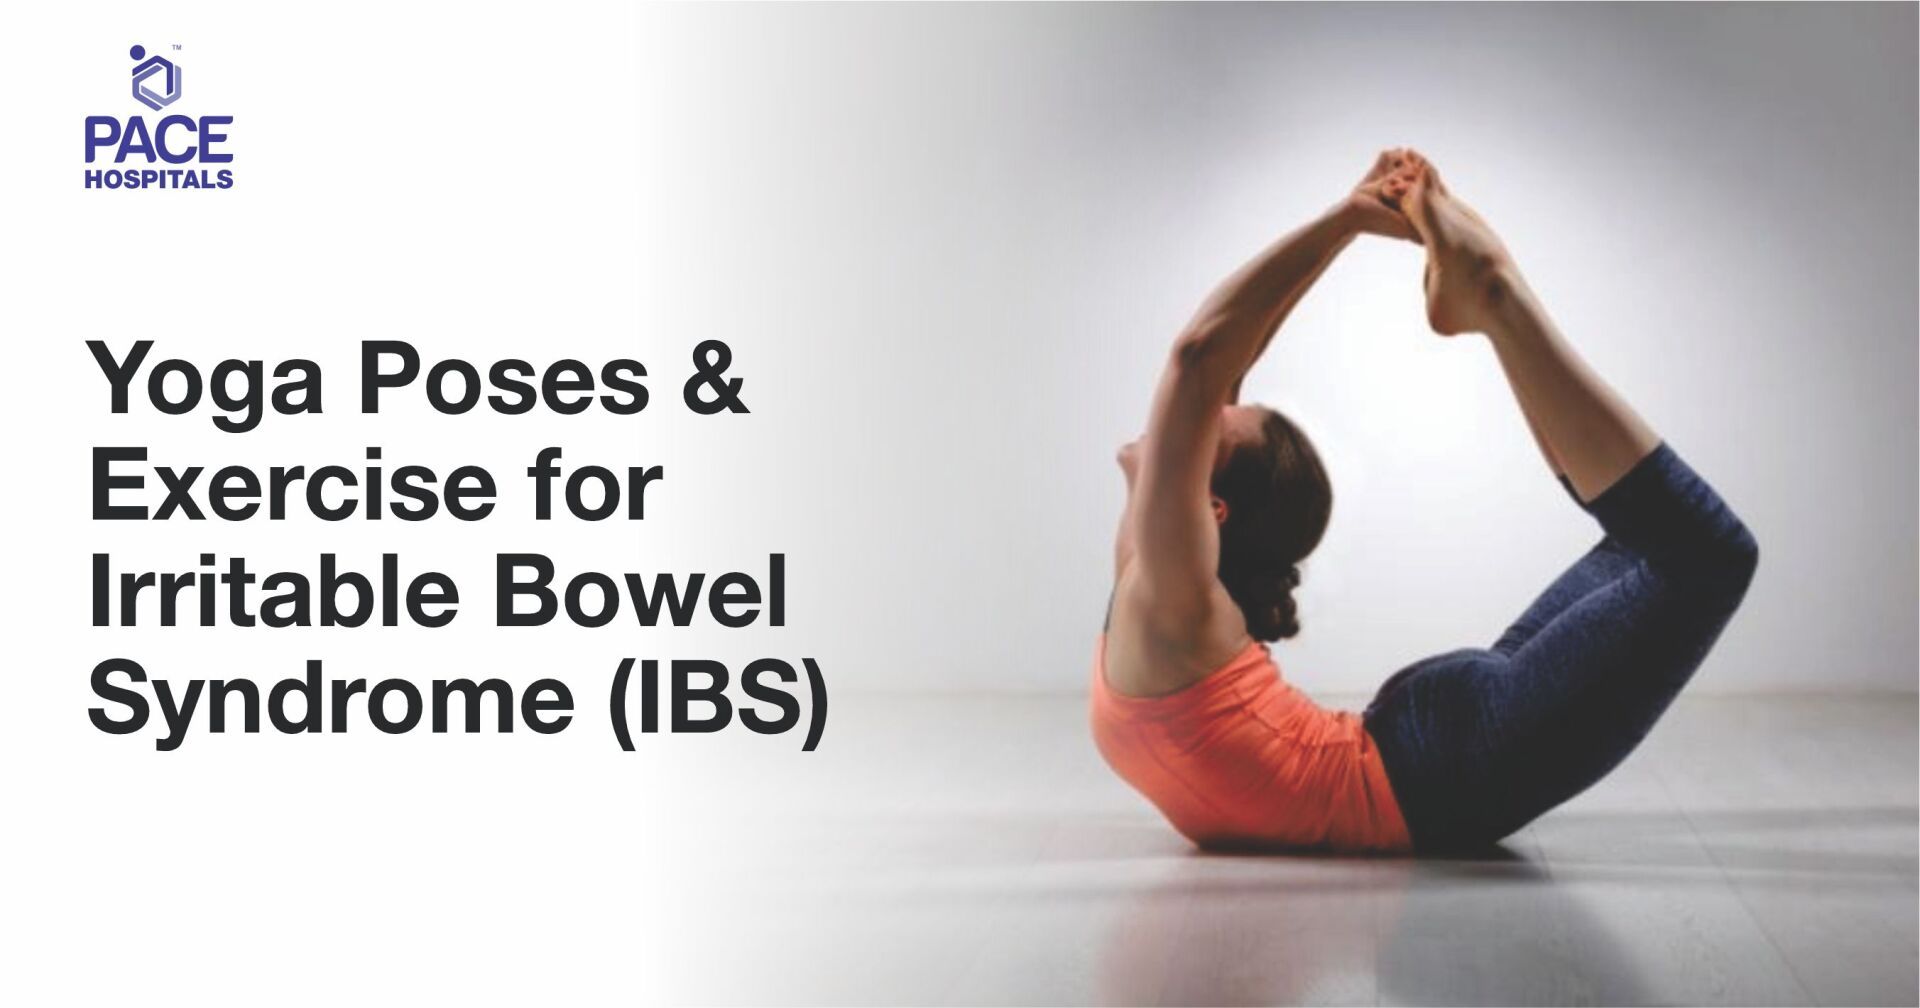 Yoga Poses that are Good for Digestion